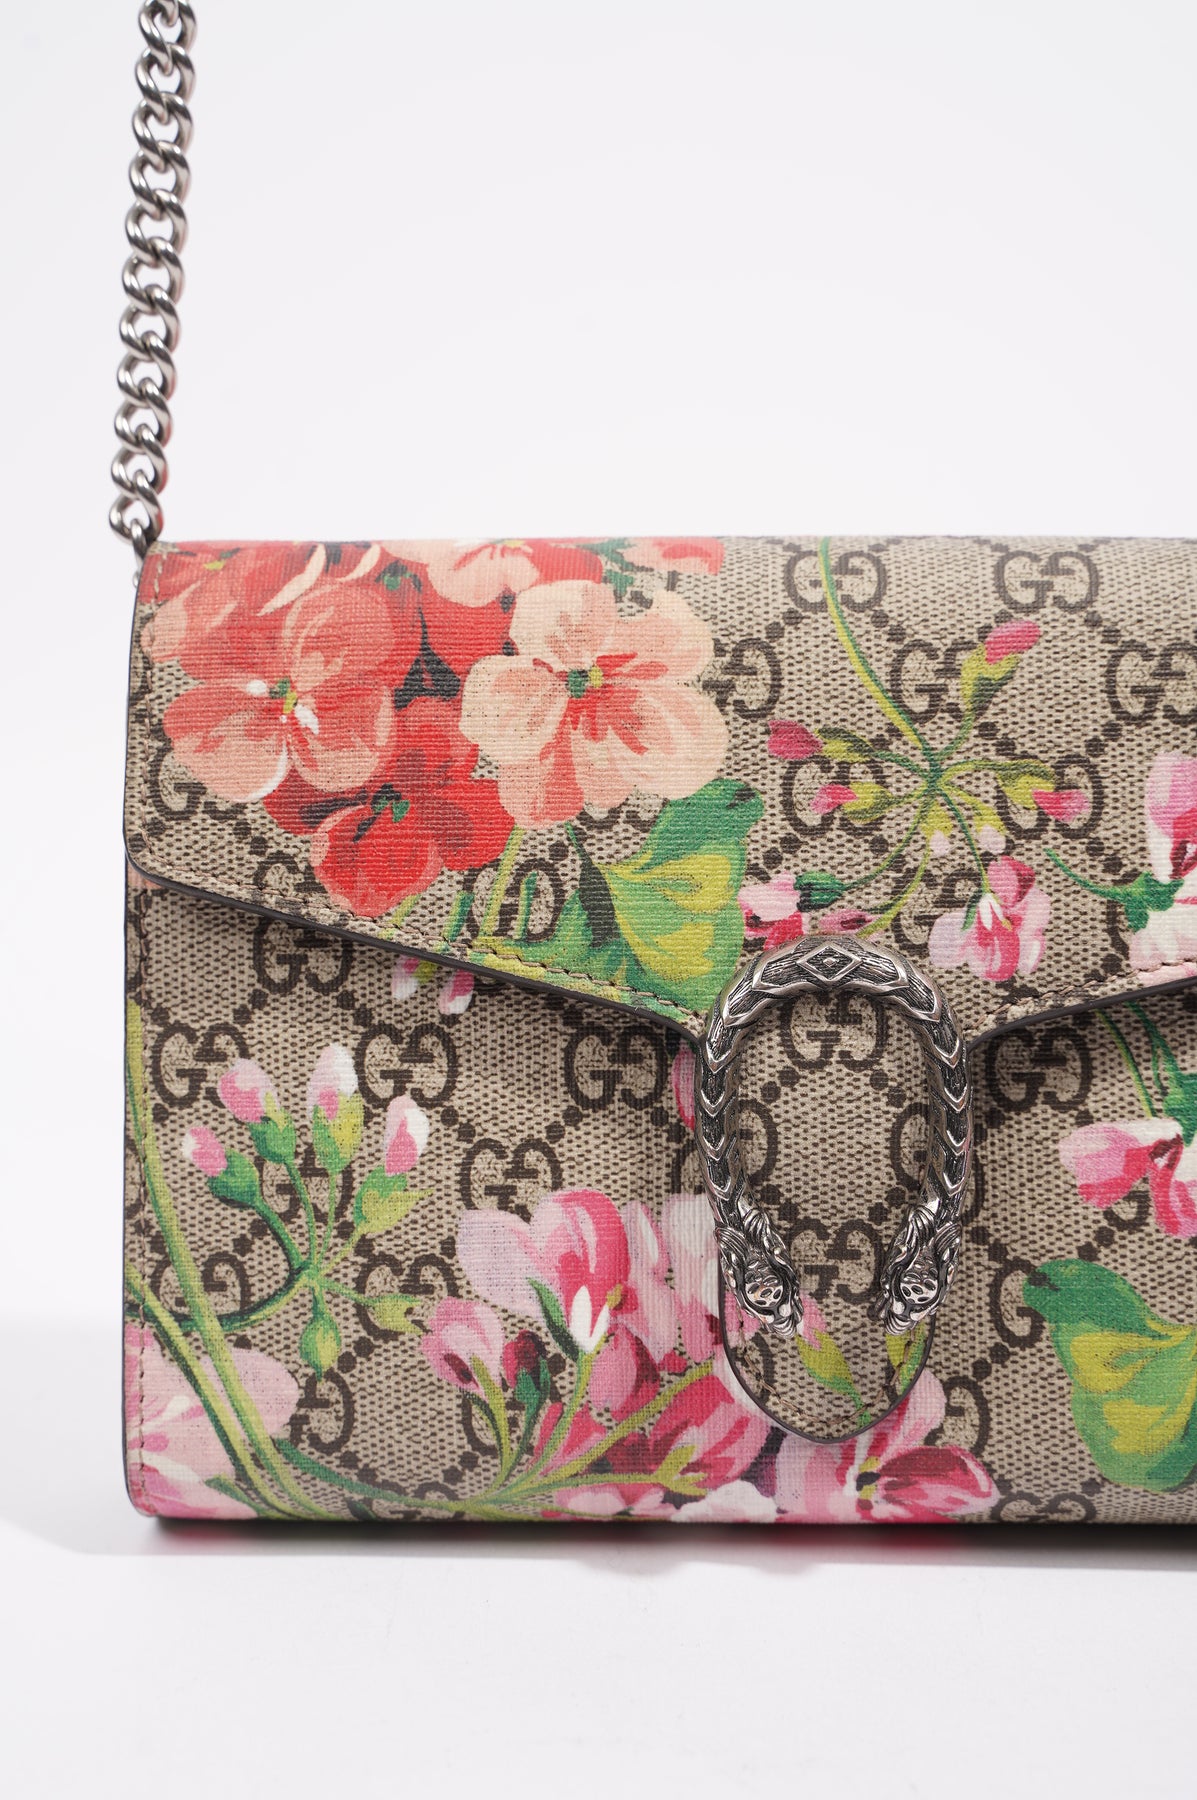 Gucci Dionysus WOC wallet of chain flower printing original leather version